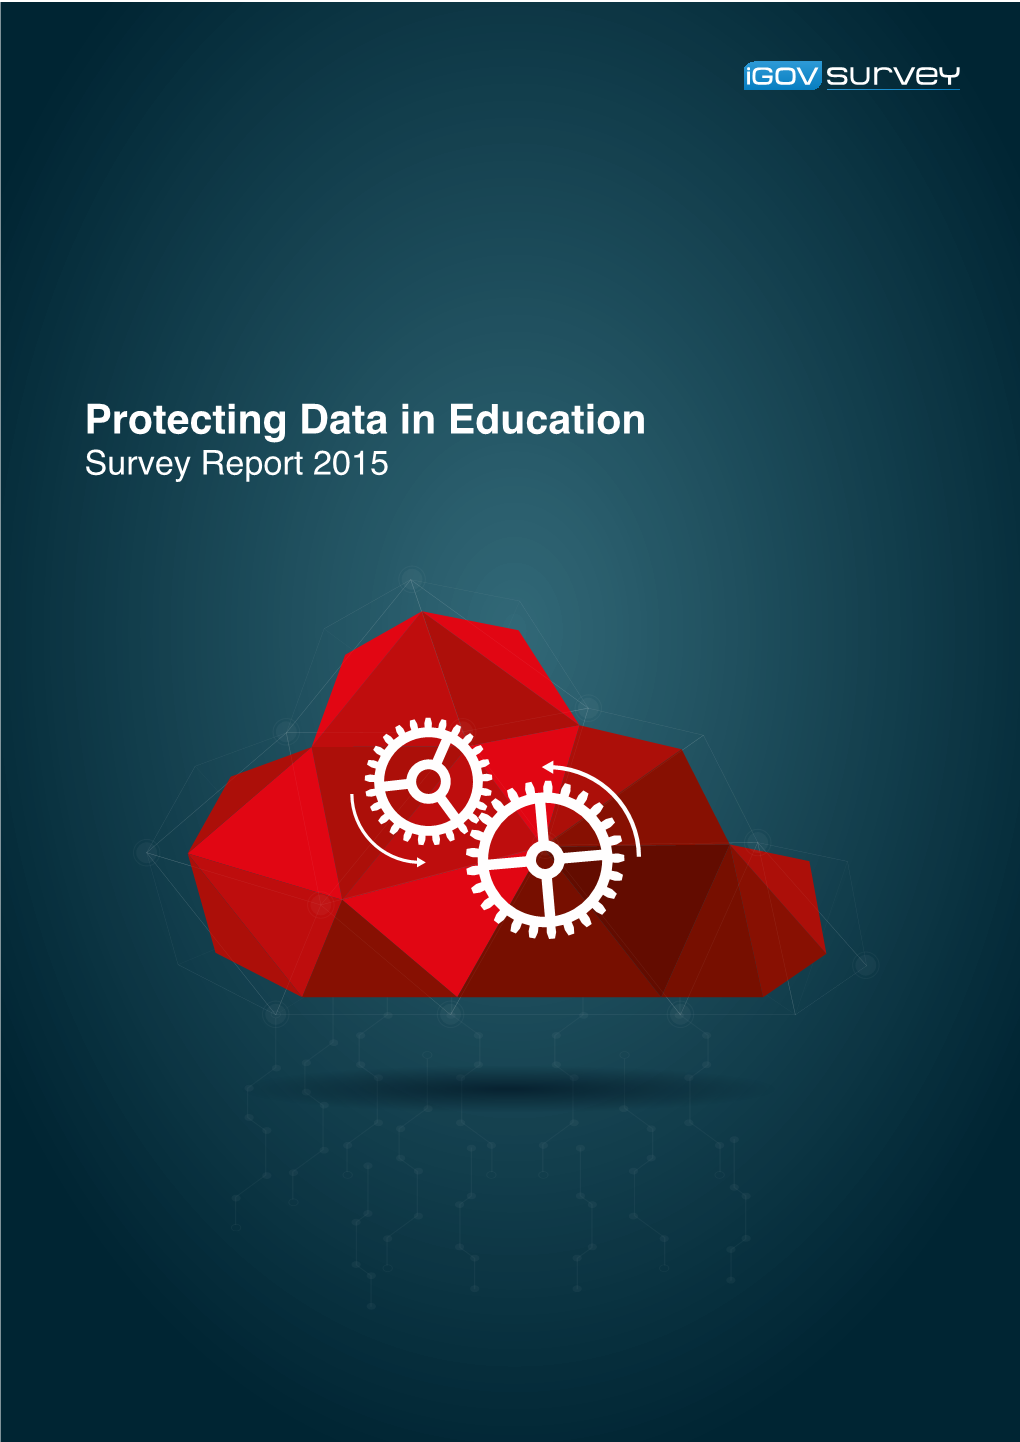 Protecting Data in Education Survey Report 2015 Contents